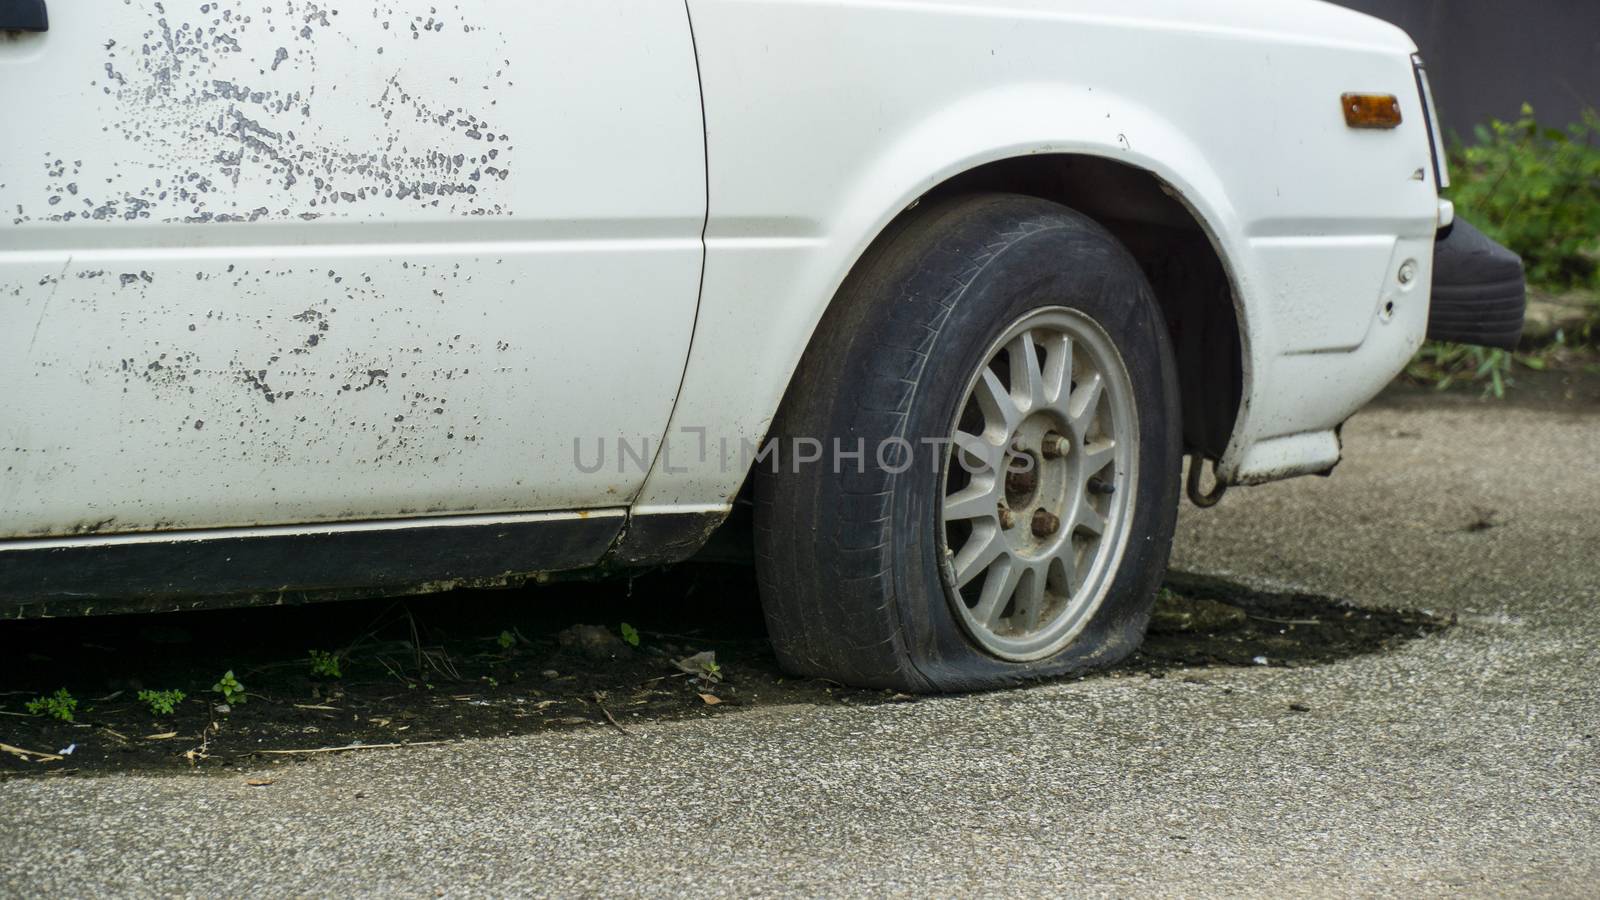 Old worn out and rusted abandoned car with flat tyre by sonandonures